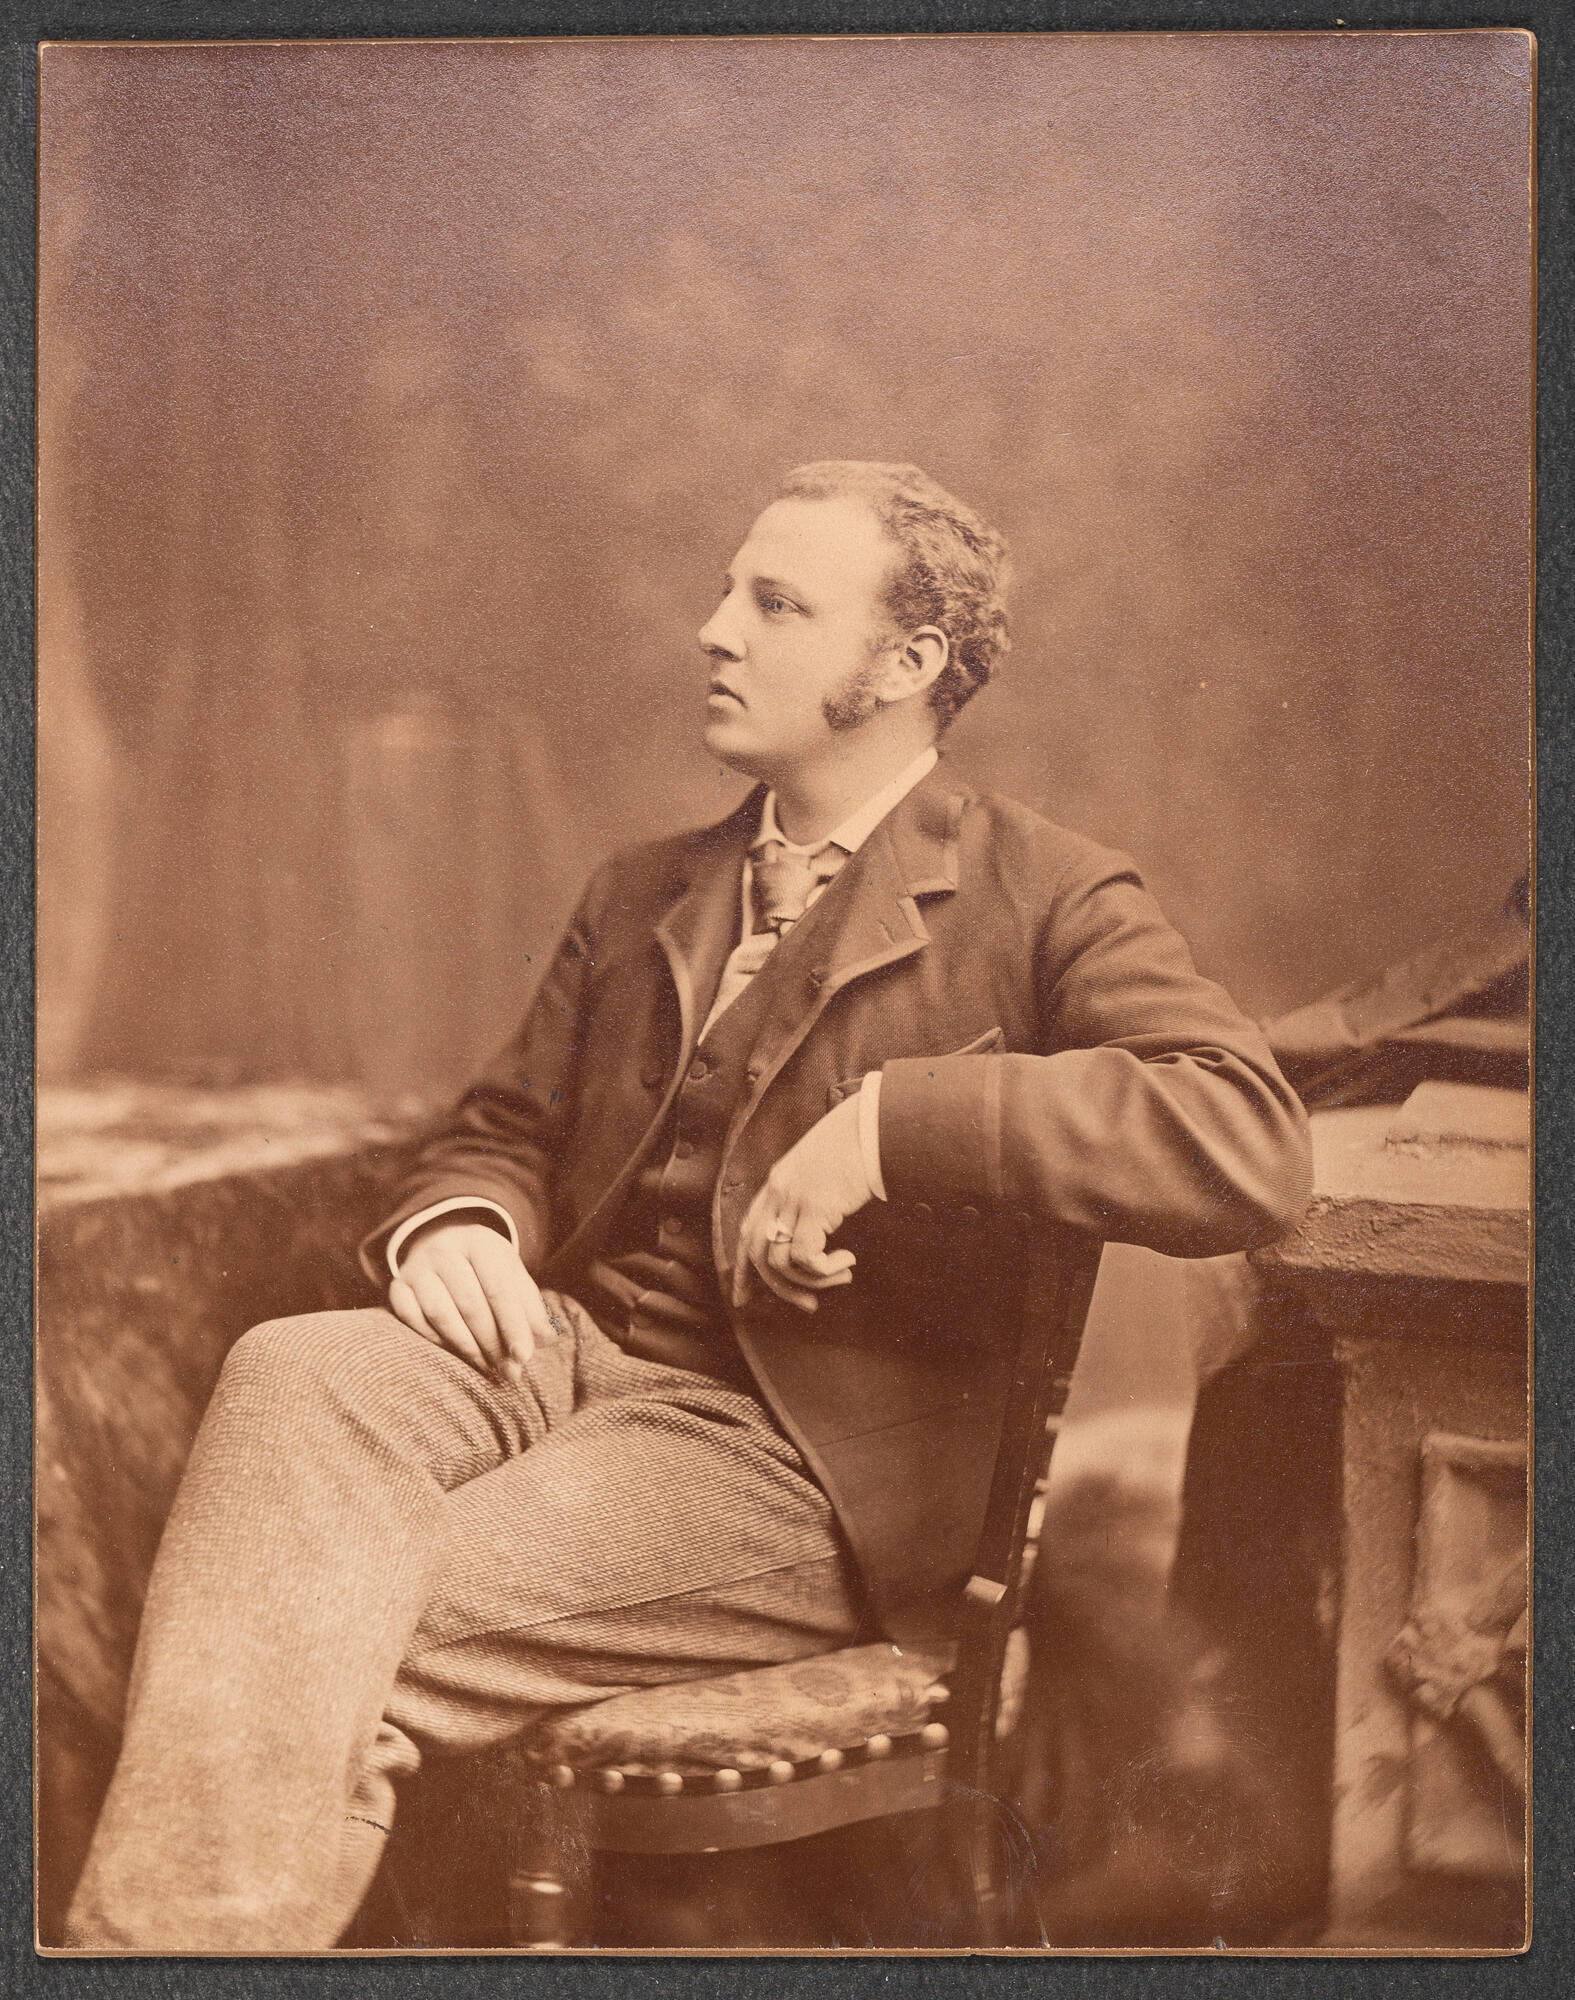 A sepia toned photograph of a man,  F. Marion Crawford, with light skin and curly hair seated in a chair.